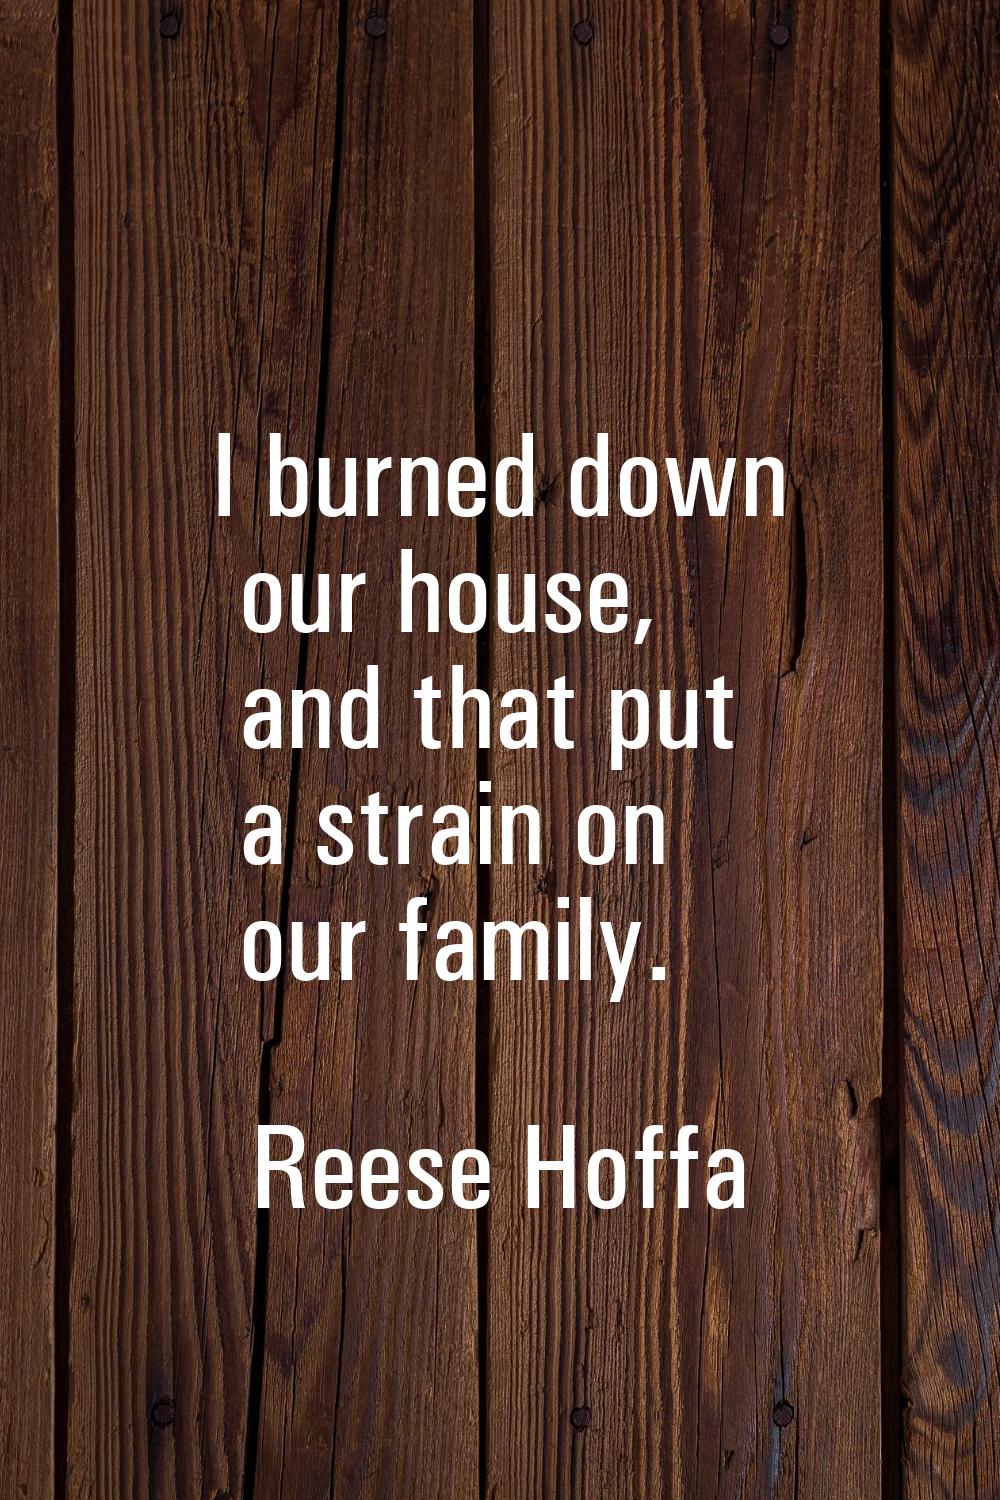 I burned down our house, and that put a strain on our family.